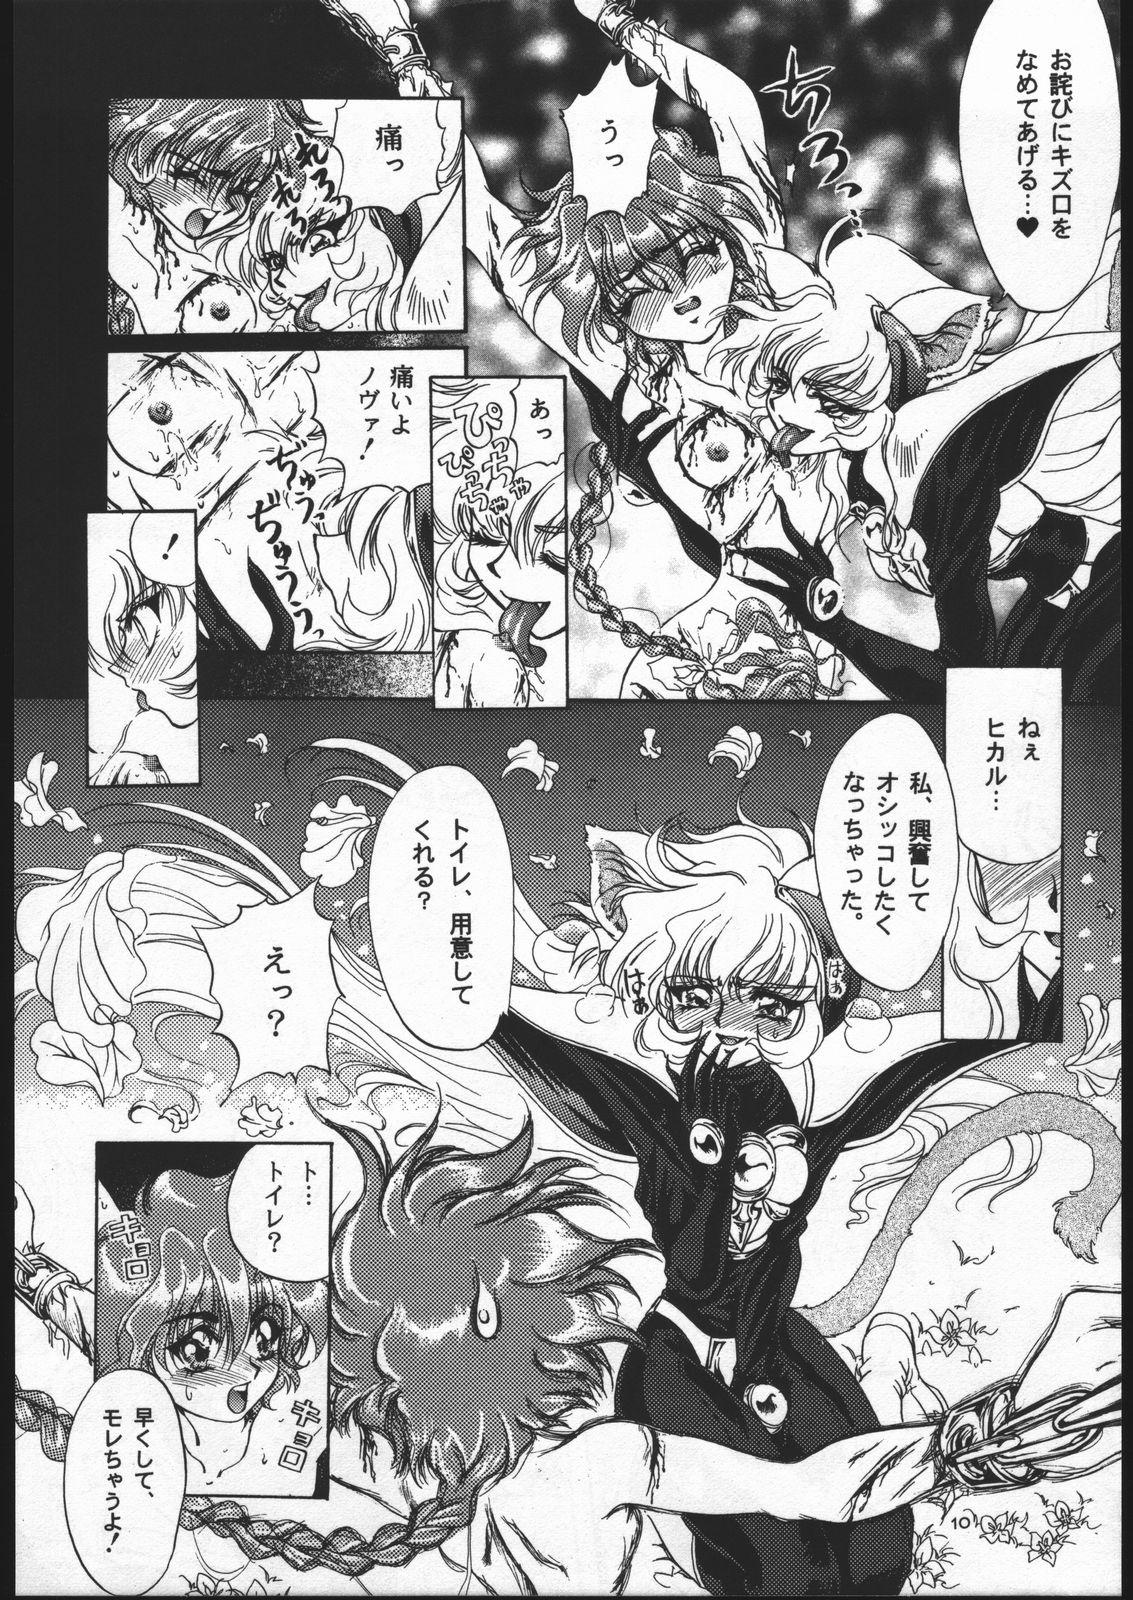 Exposed Rose Pink - Magic knight rayearth Cop - Page 9